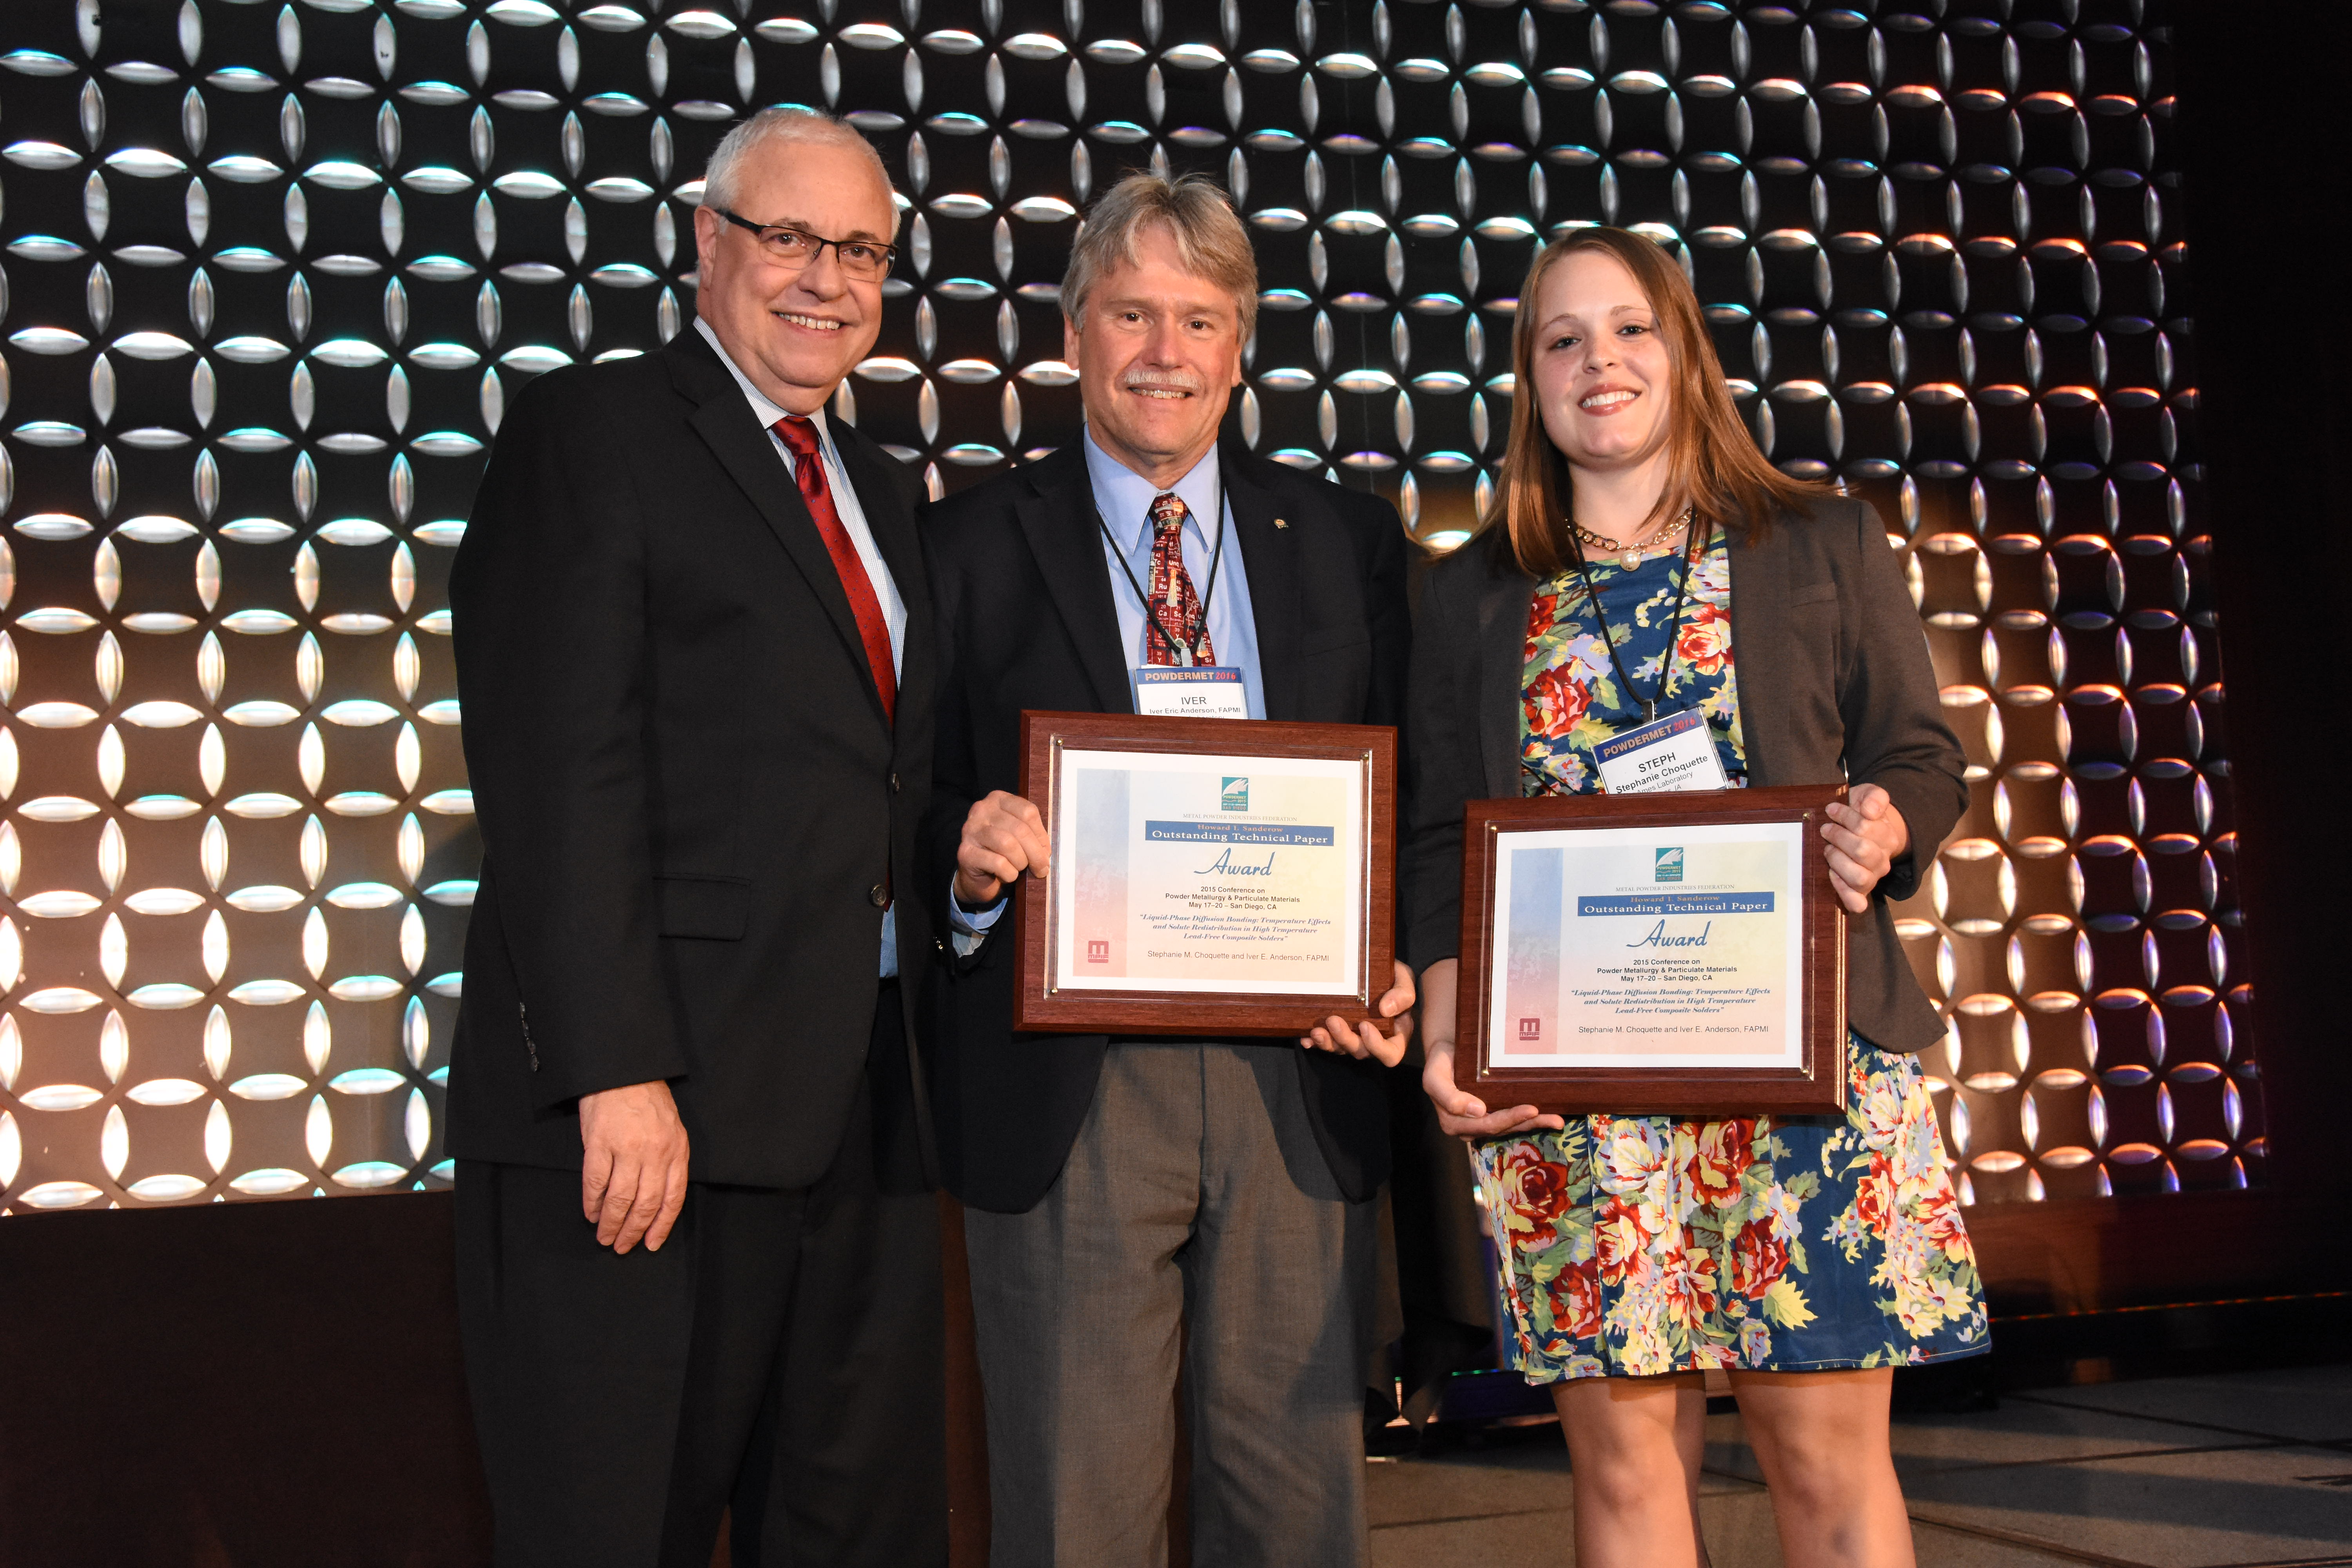 Stephanie M Choquette, graduate research assistant, and Iver E Anderson, FAPMI, senior metallurgist, Ames Laboratory, receiving the award.